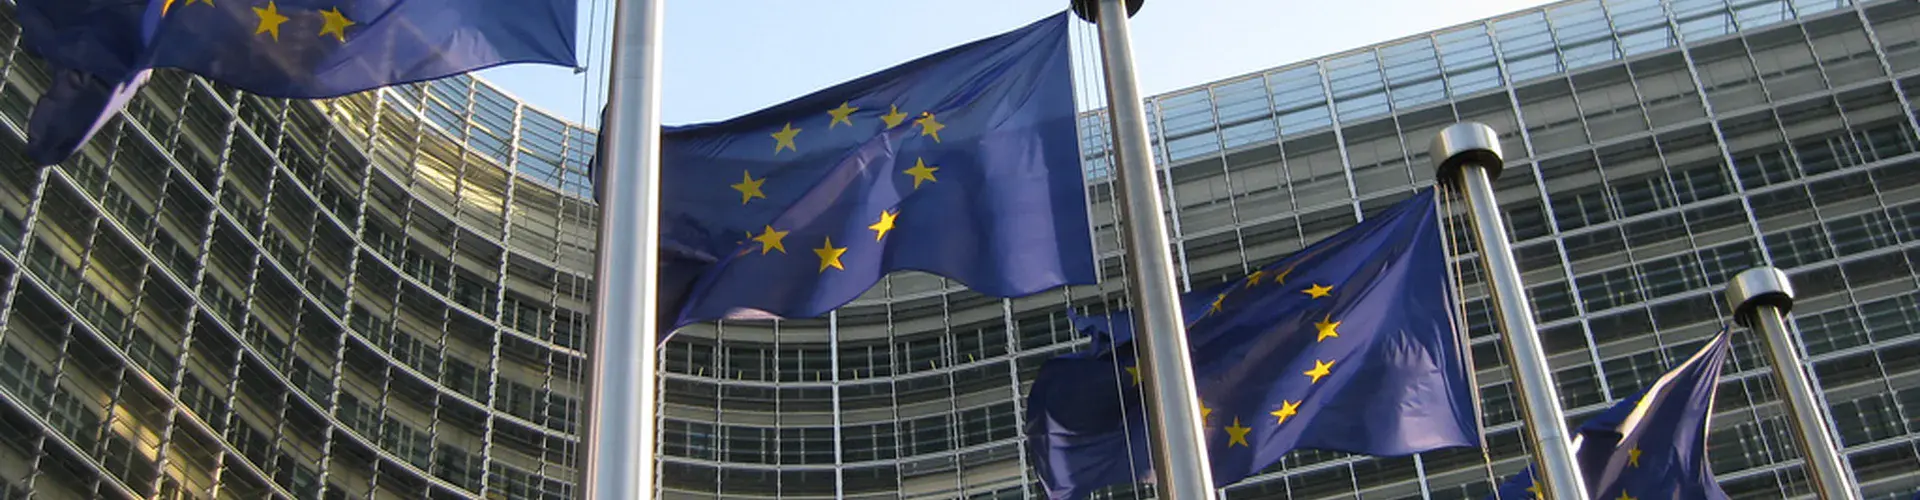 European flags flying in front of the Berlaymont Building in Brussels (Credit: TPCOM, via Flickr)